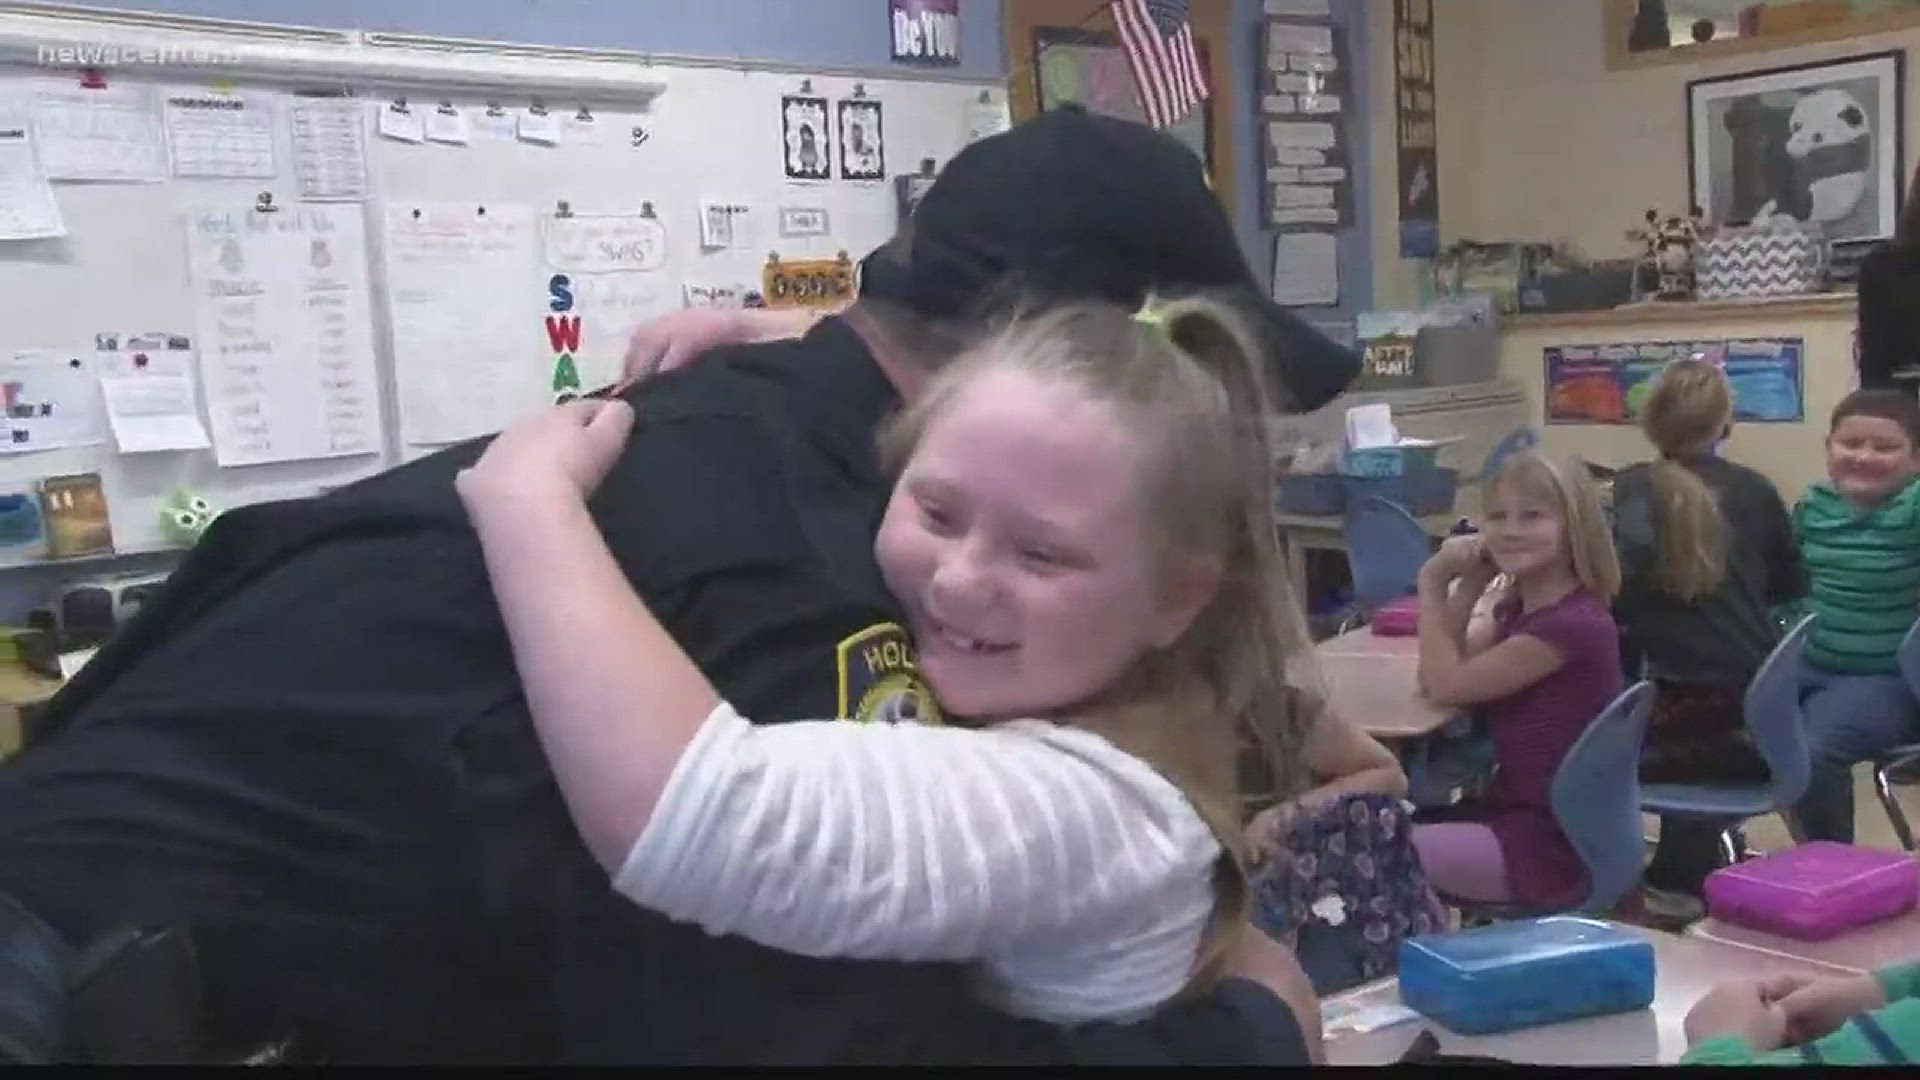 NOW: Holden Police Chief delivers teddy bears to classroom